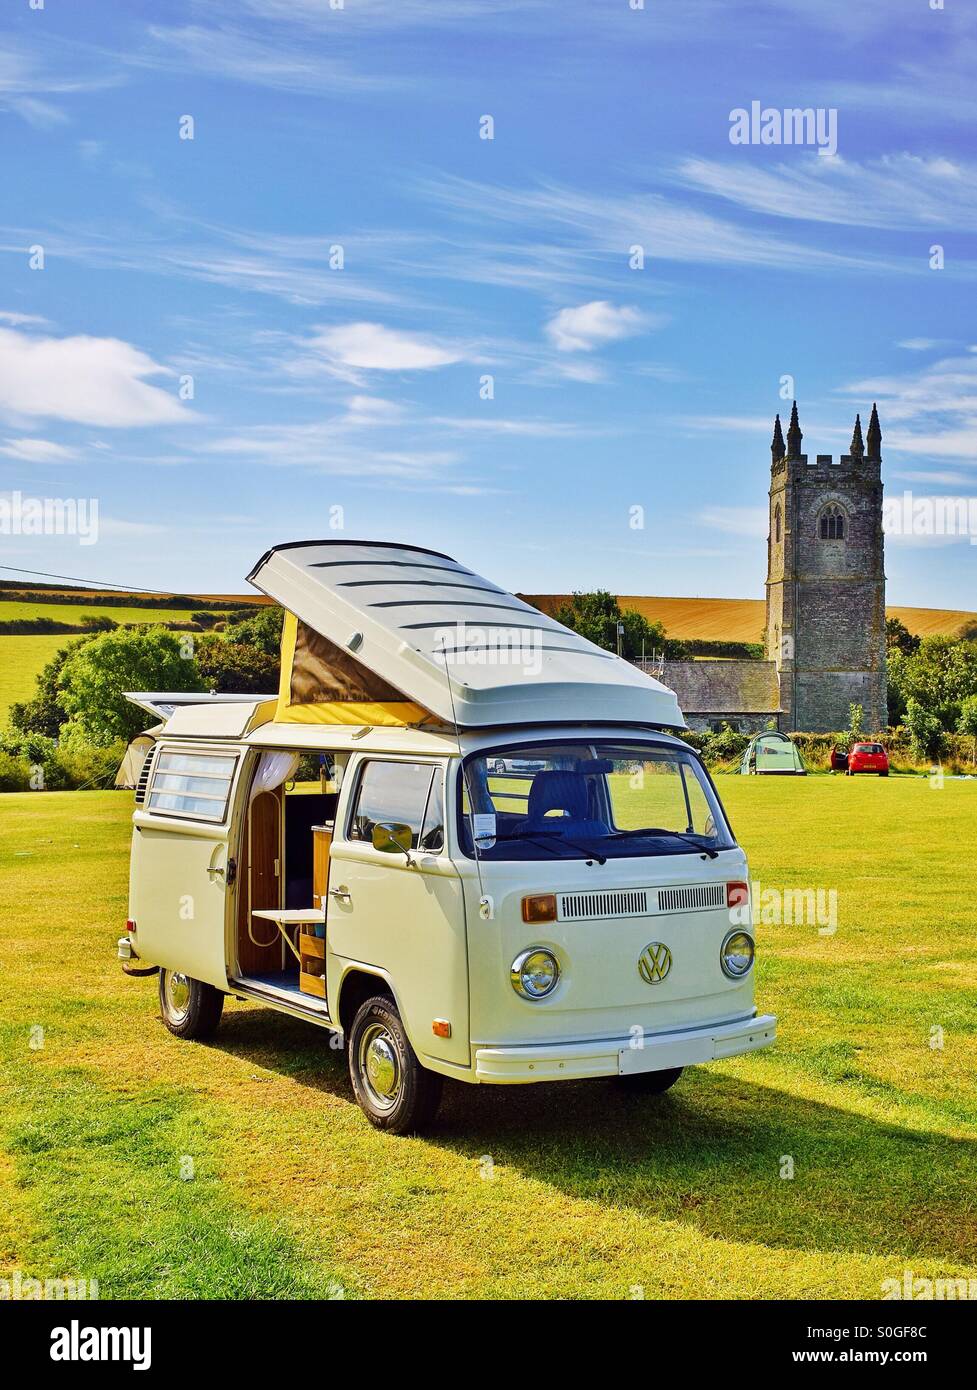 A vintage VW camper van out camping in the beautiful English countryside Stock Photo